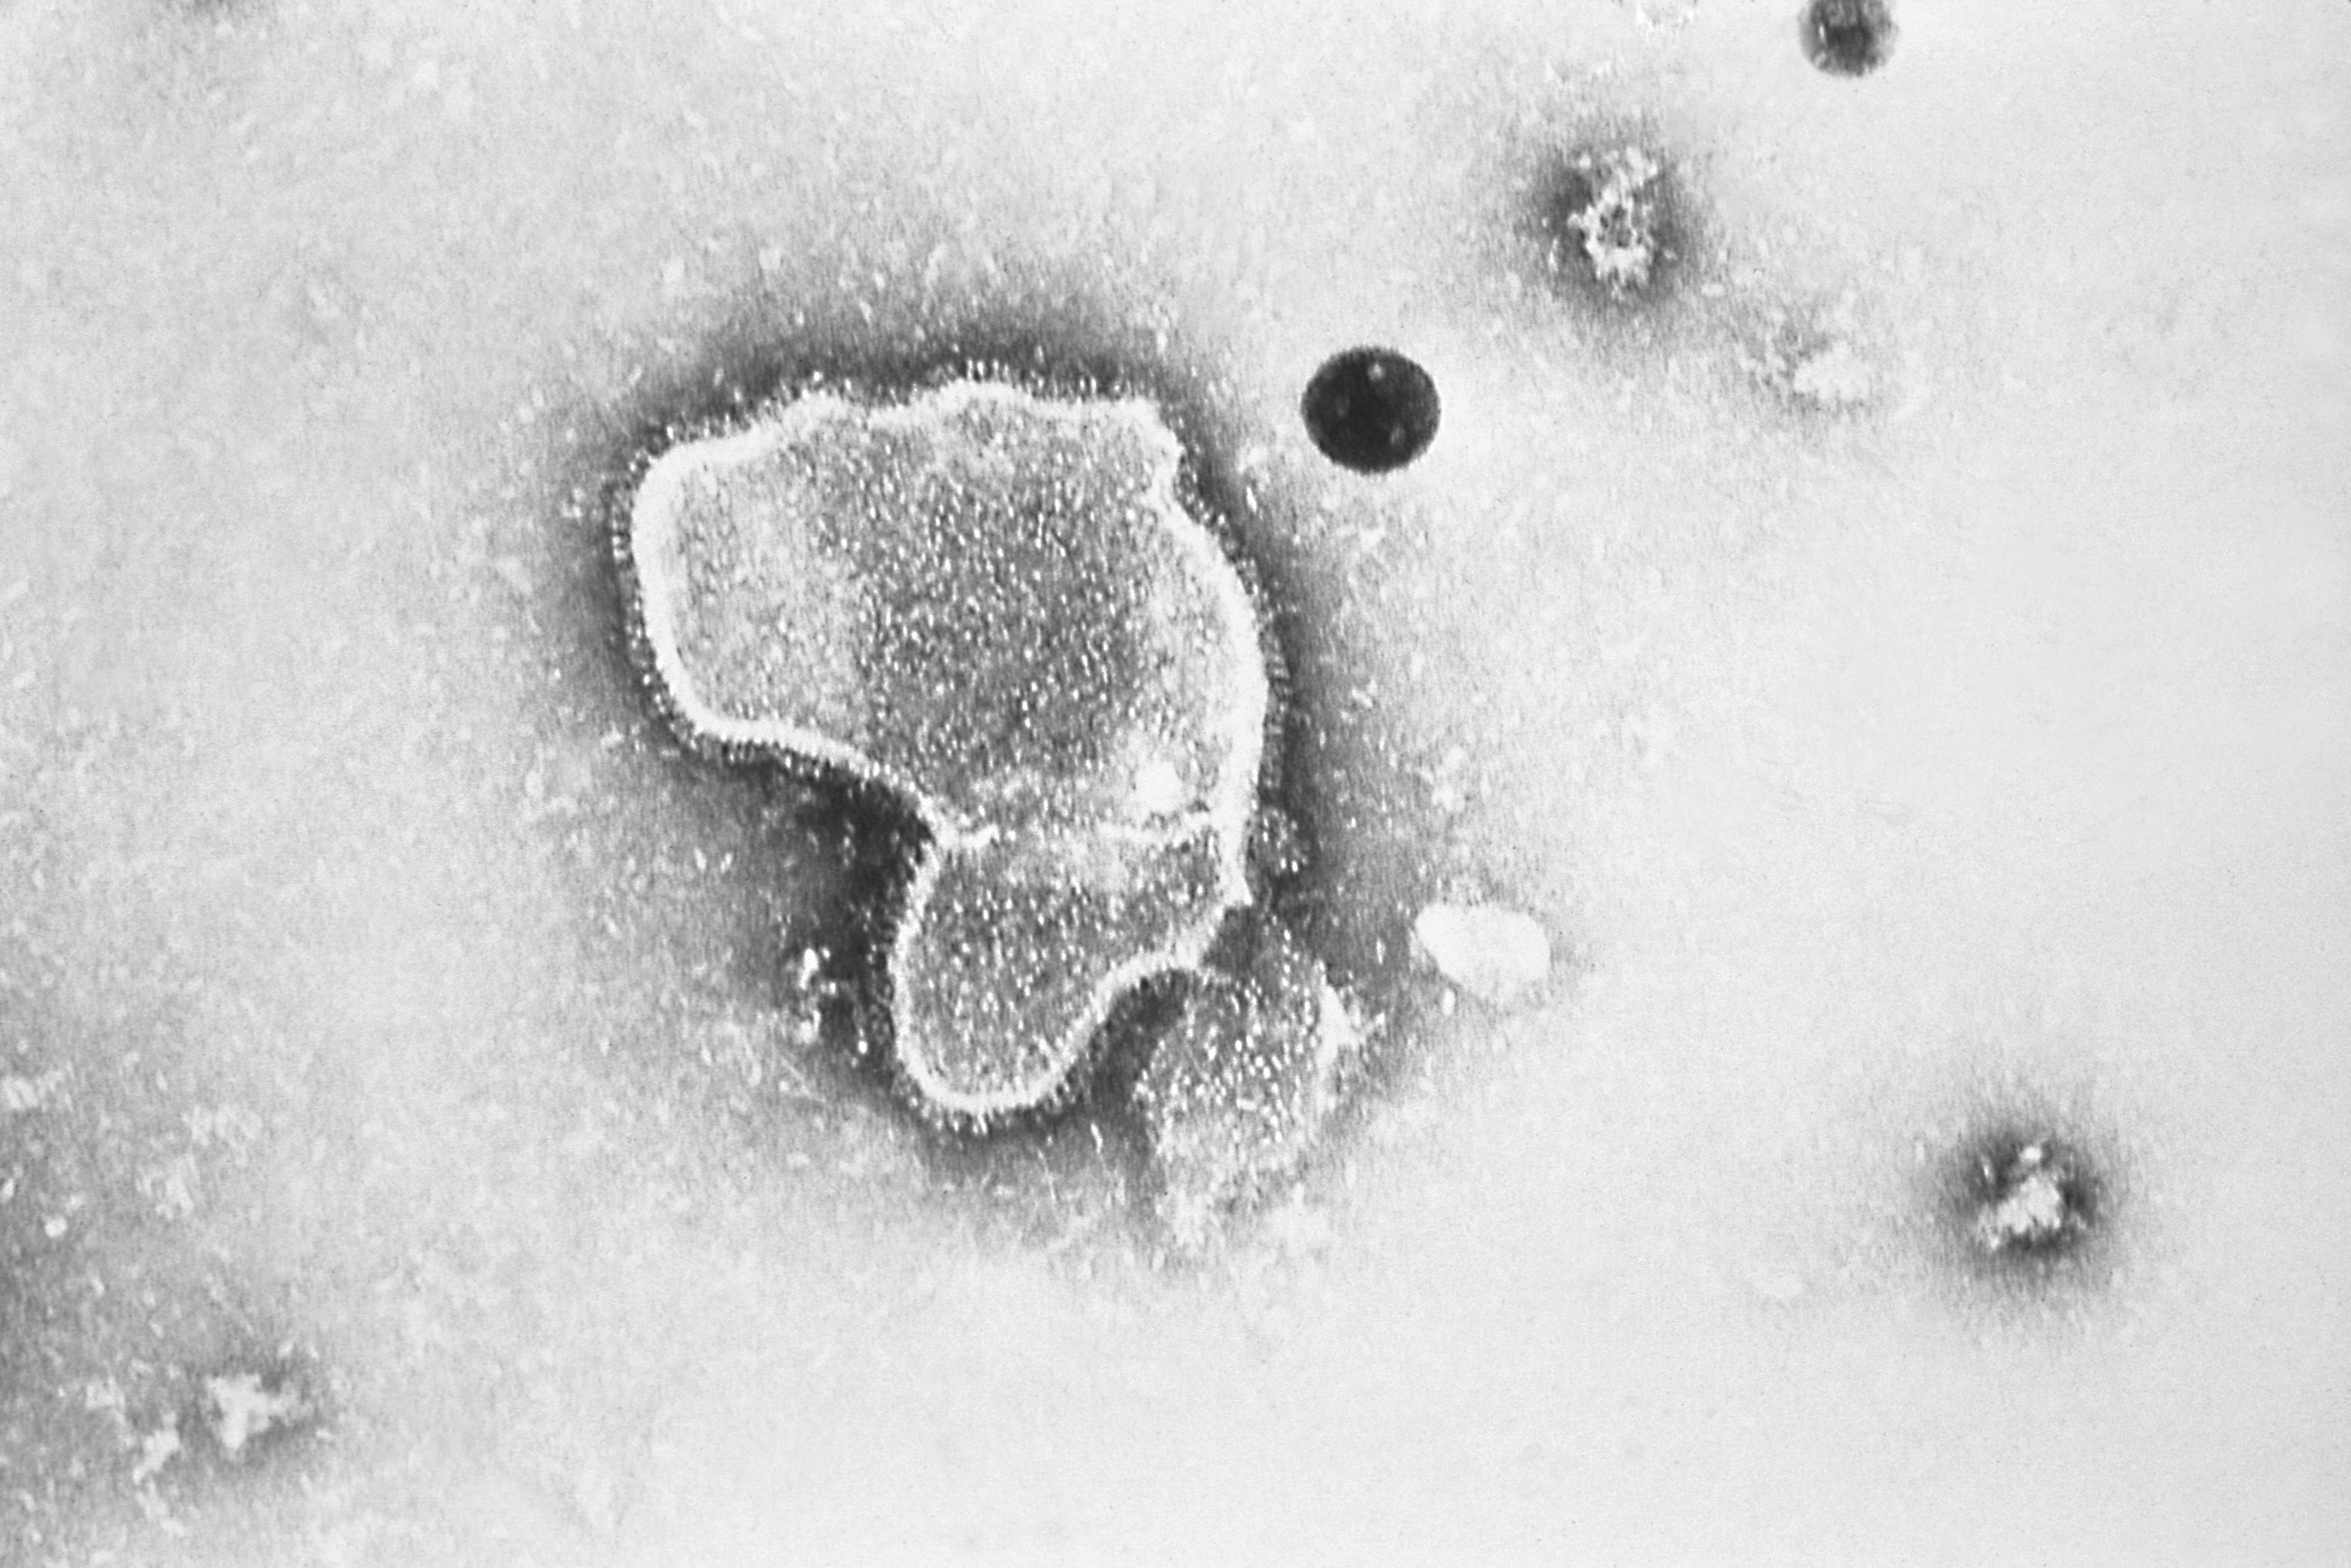 This 1981 electron microscope image provided by the Centers for Disease Control and Prevention shows a human respiratory syncytial virus, also known as RSV. (CDC via AP)